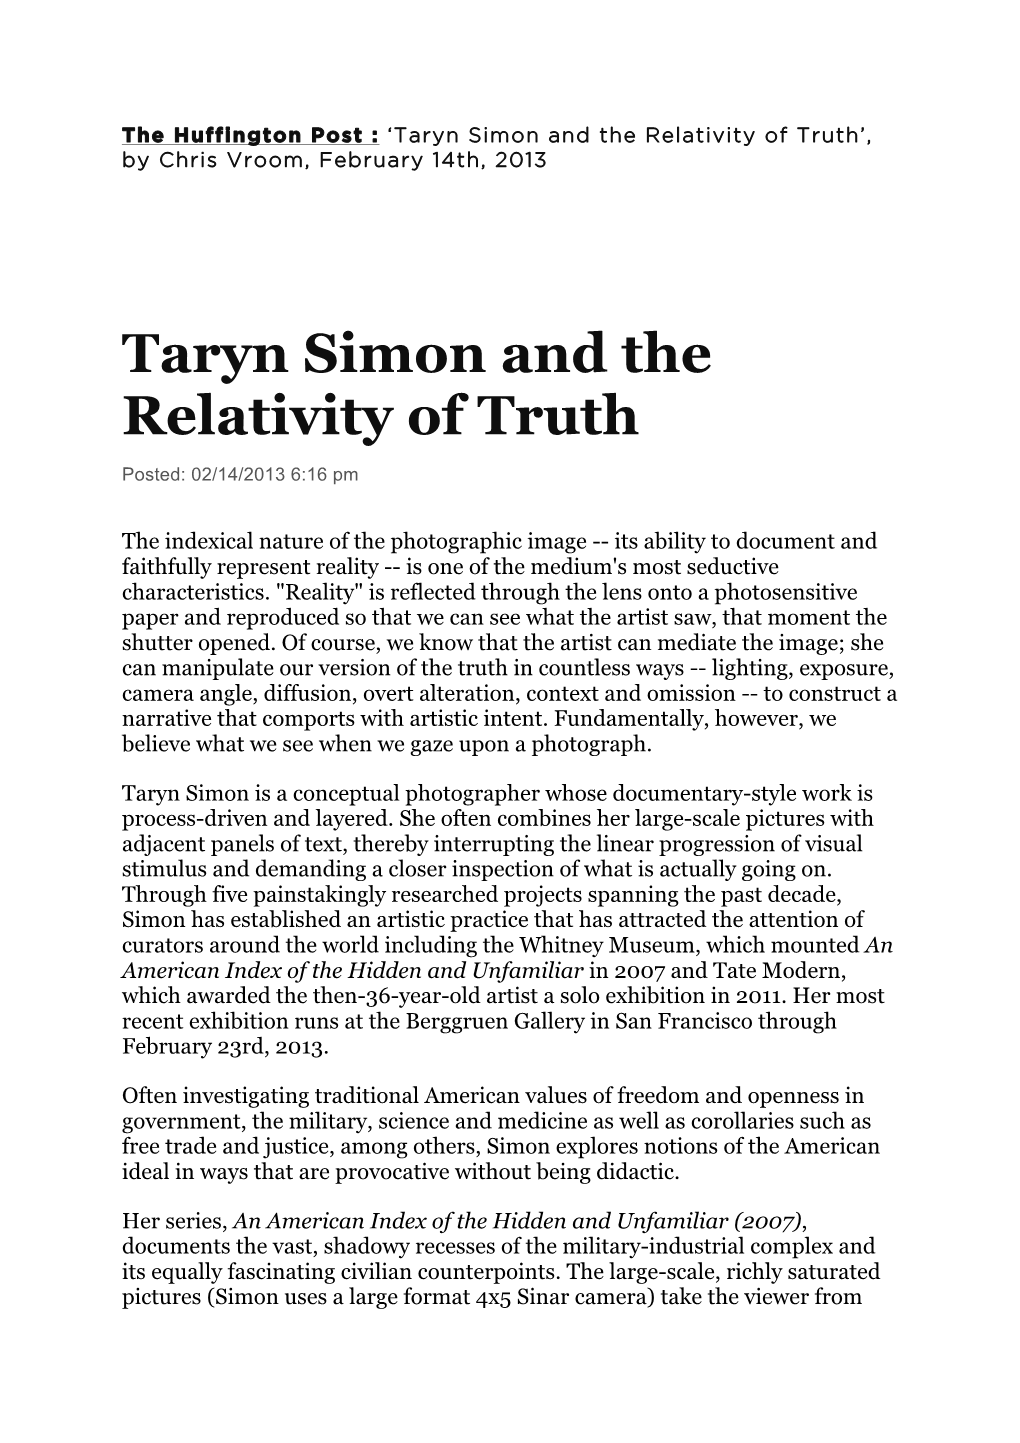 Taryn Simon and the Relativity of Truth’, by Chris Vroom, February 14Th, 2013